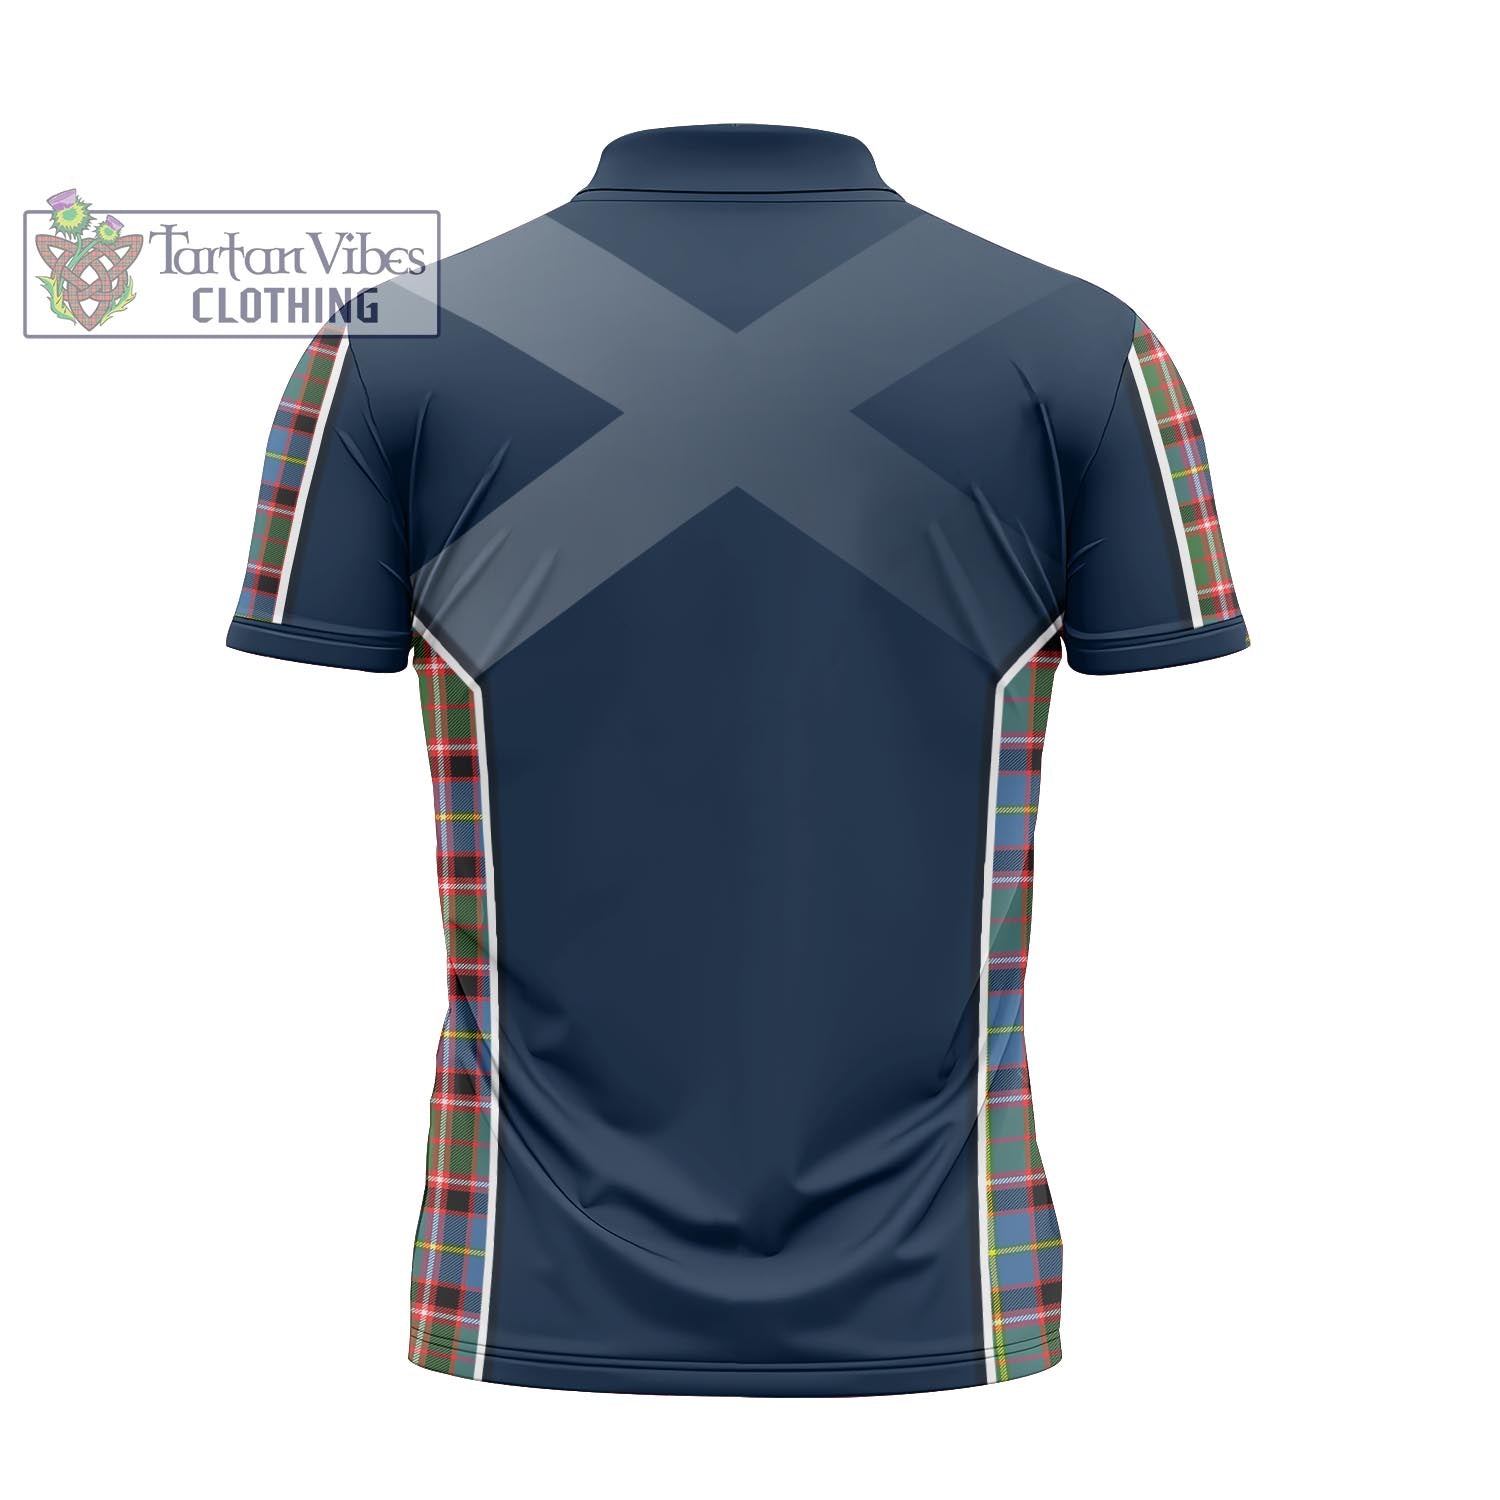 Tartan Vibes Clothing Norvel Tartan Zipper Polo Shirt with Family Crest and Lion Rampant Vibes Sport Style